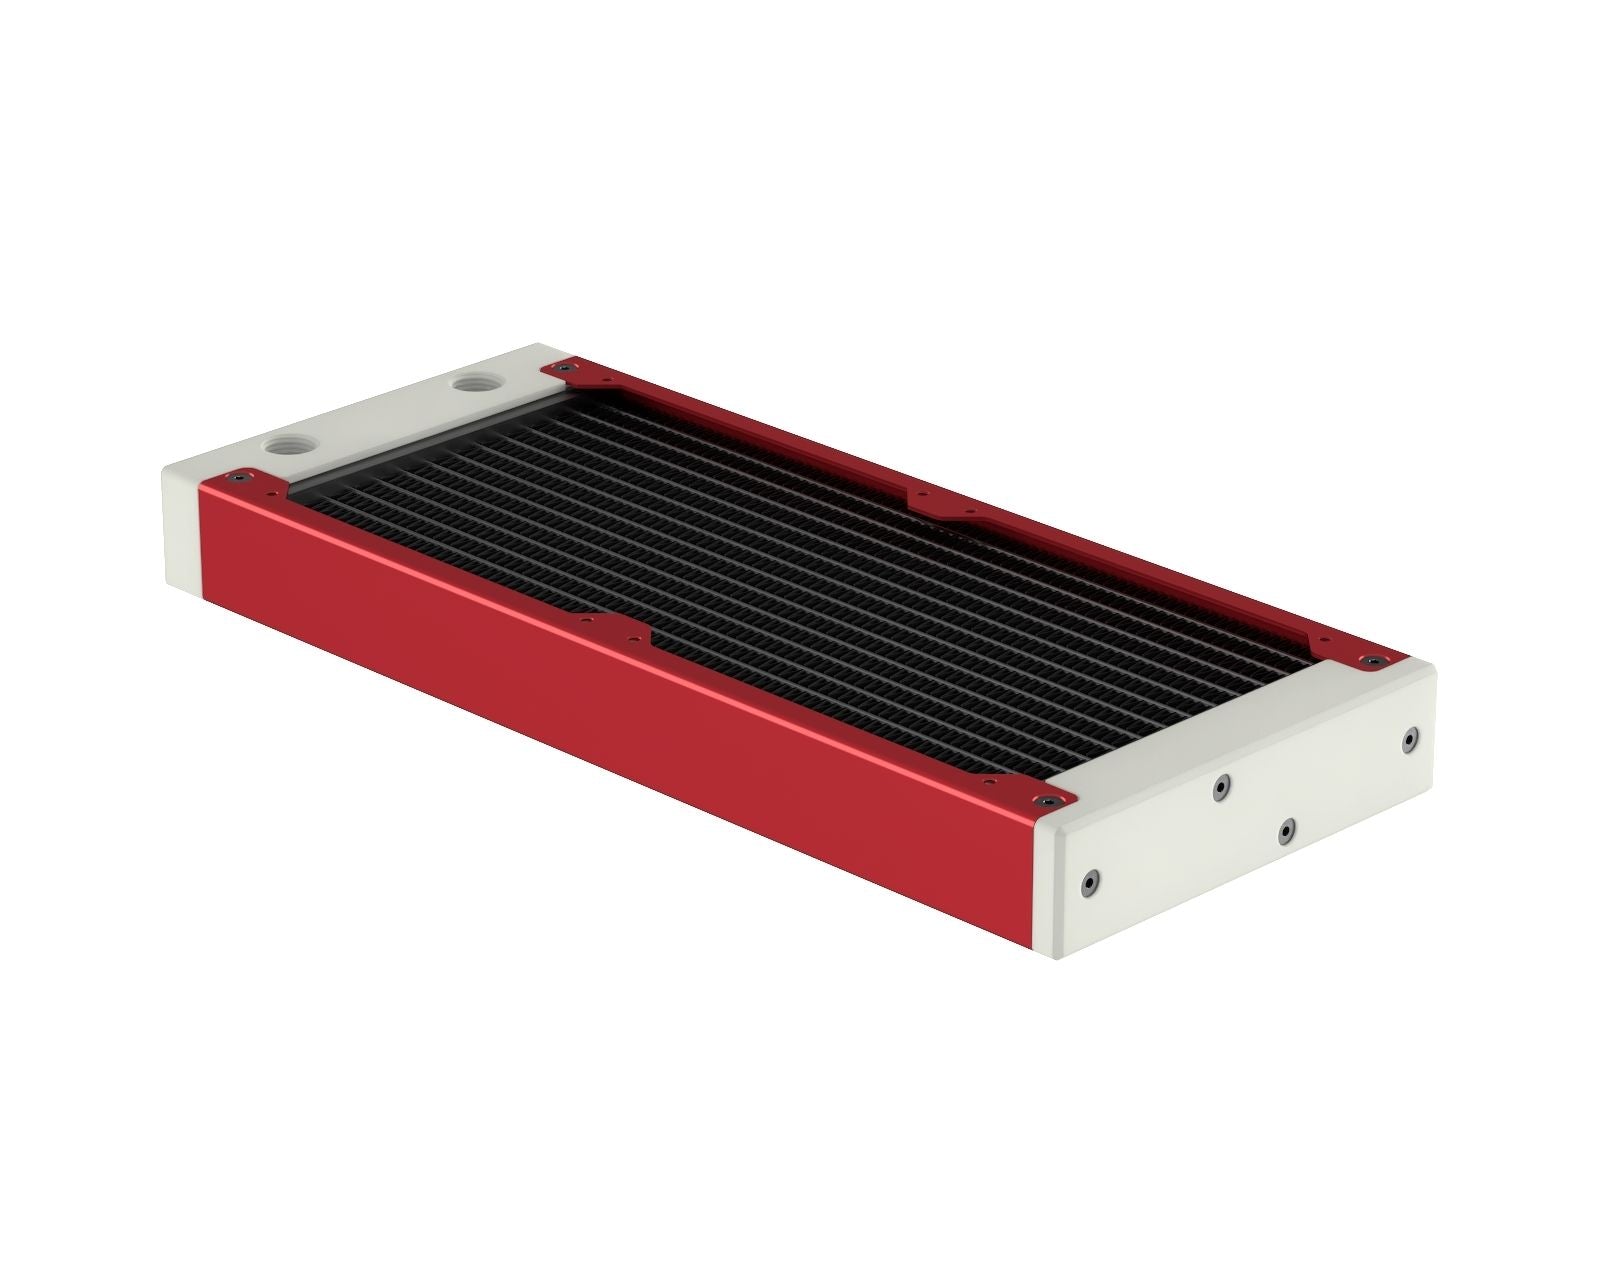 PrimoChill 240SL (30mm) EXIMO Modular Radiator, White POM, 2x120mm, Dual Fan (R-SL-W24) Available in 20+ Colors, Assembled in USA and Custom Watercooling Loop Ready - Candy Red